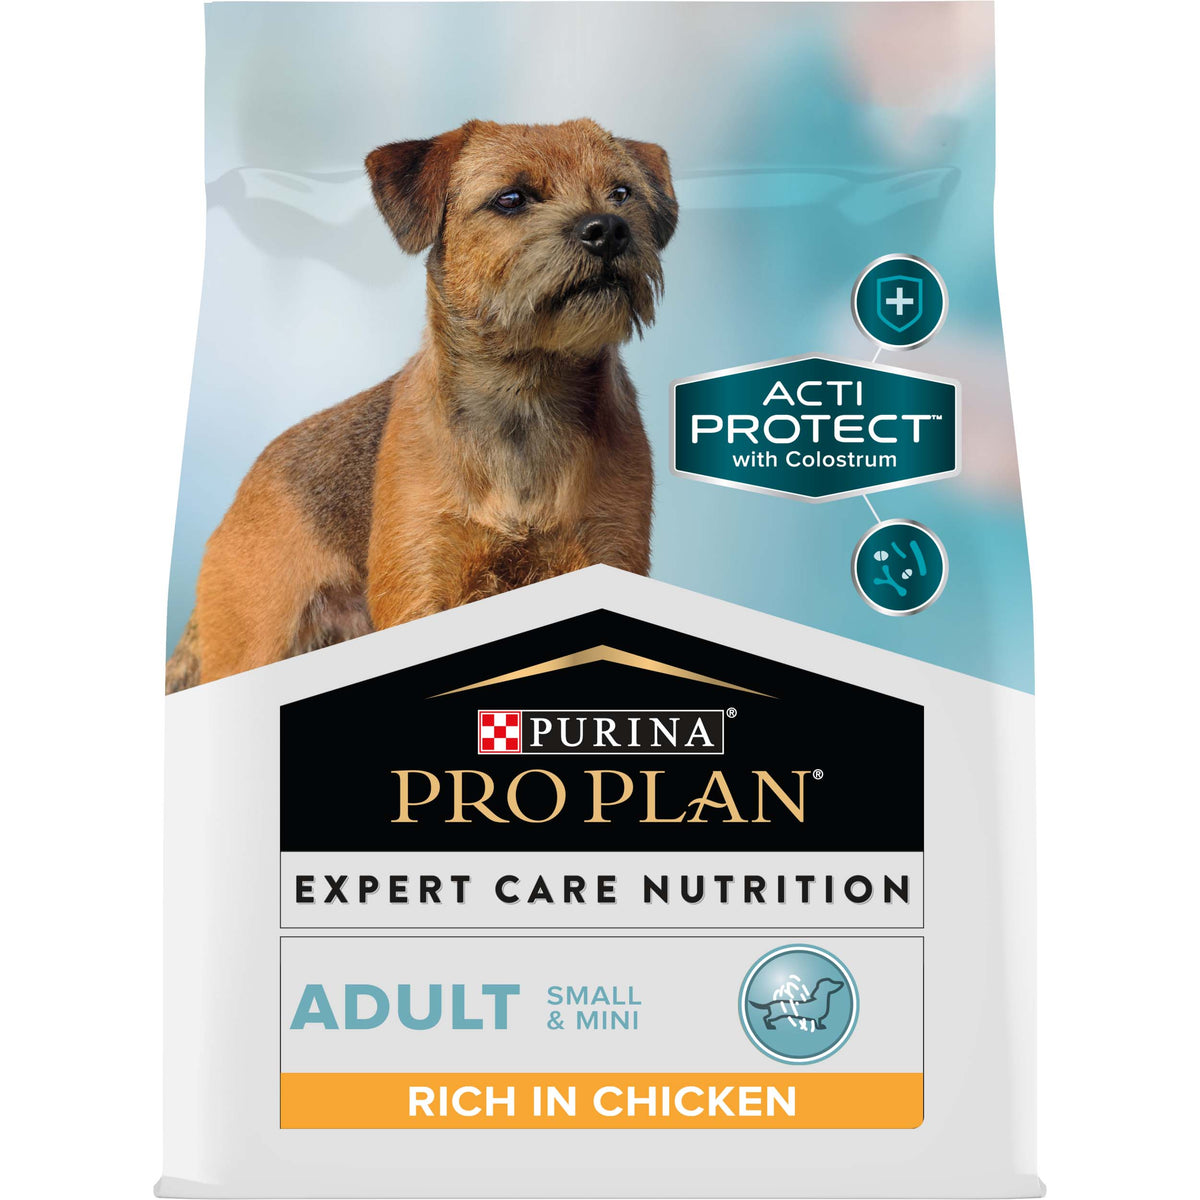 PURINA® PRO PLAN® Expert Care Nutrition - Canine Adult Small & Mini - Chicken 3kg